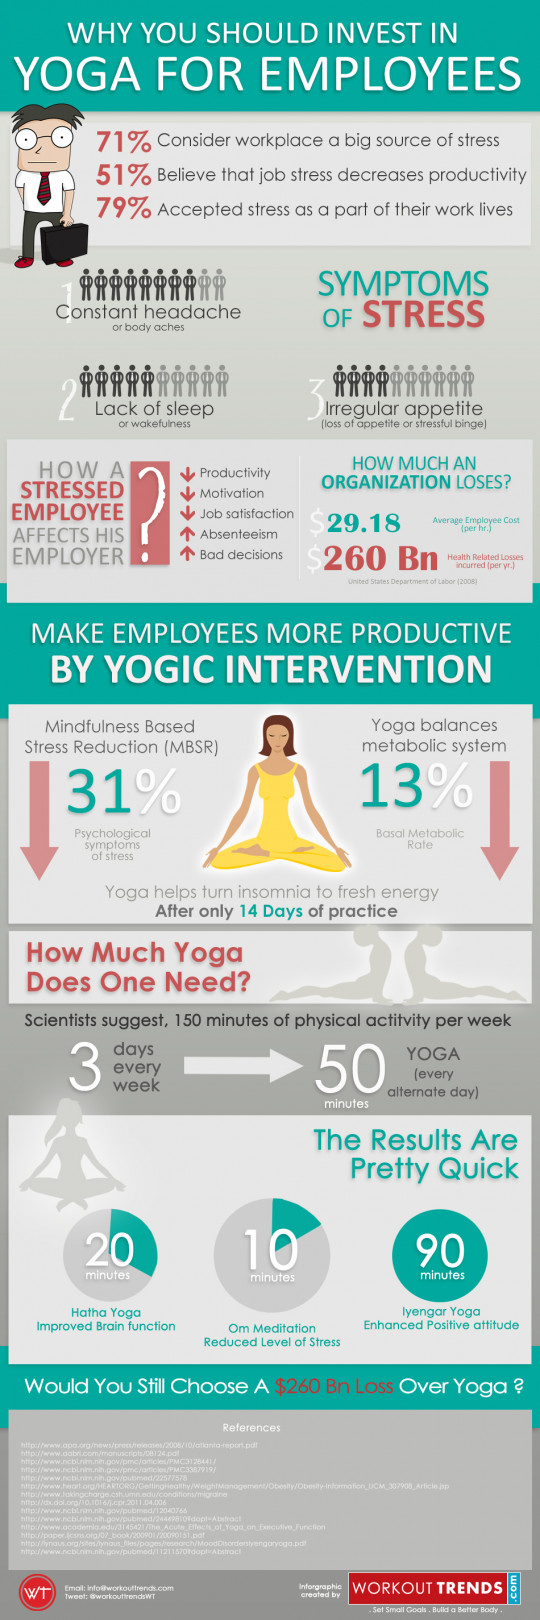 Why You Should Invest In Yoga For Employees